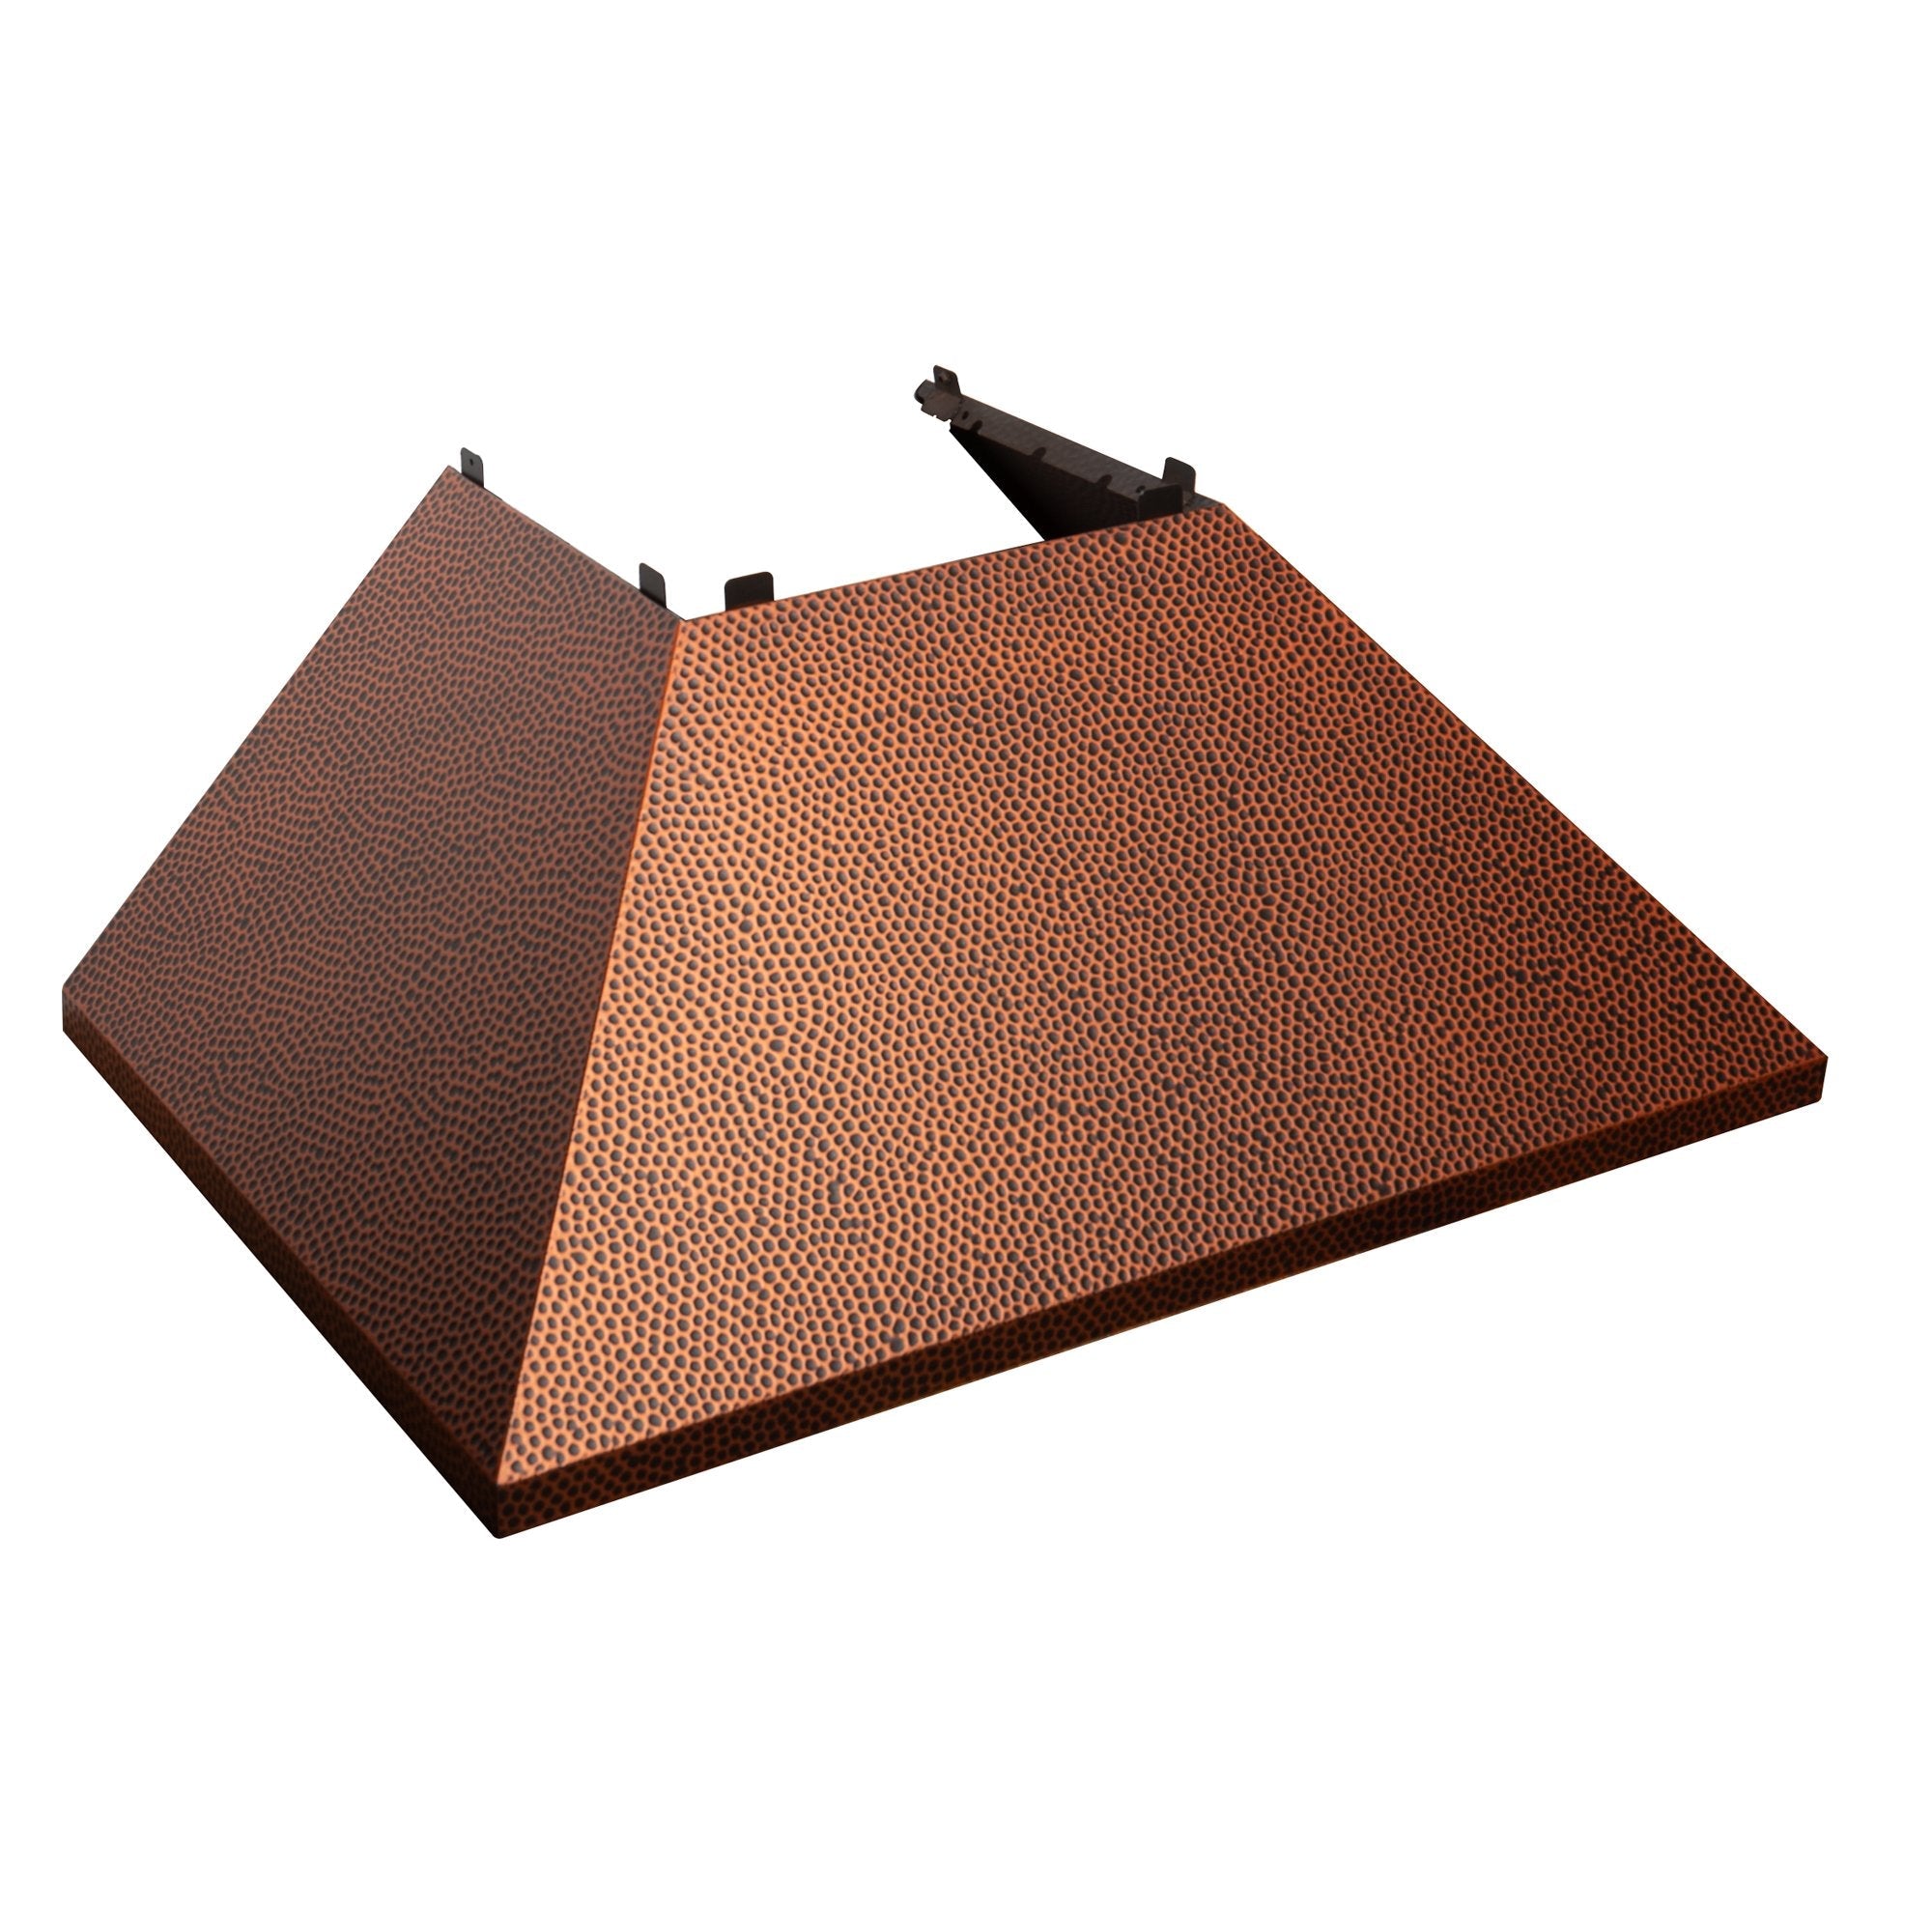 30" Ducted Fingerprint Resistant Stainless Steel Range Hood with Hand-Hammered Copper Shell (8654HH-30)